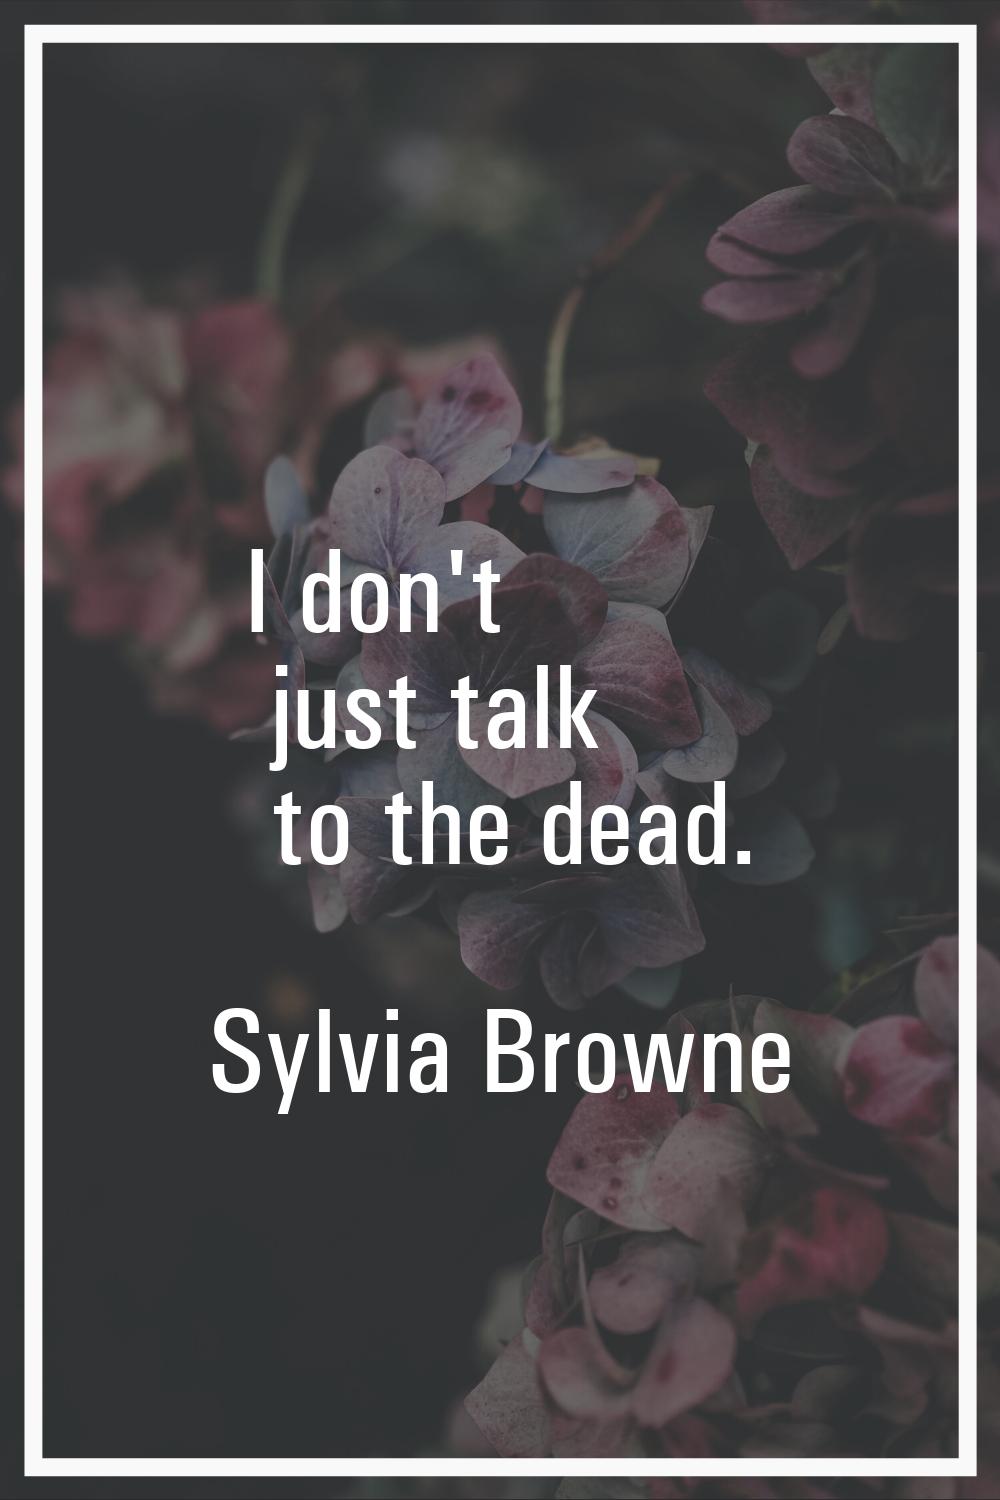 I don't just talk to the dead.